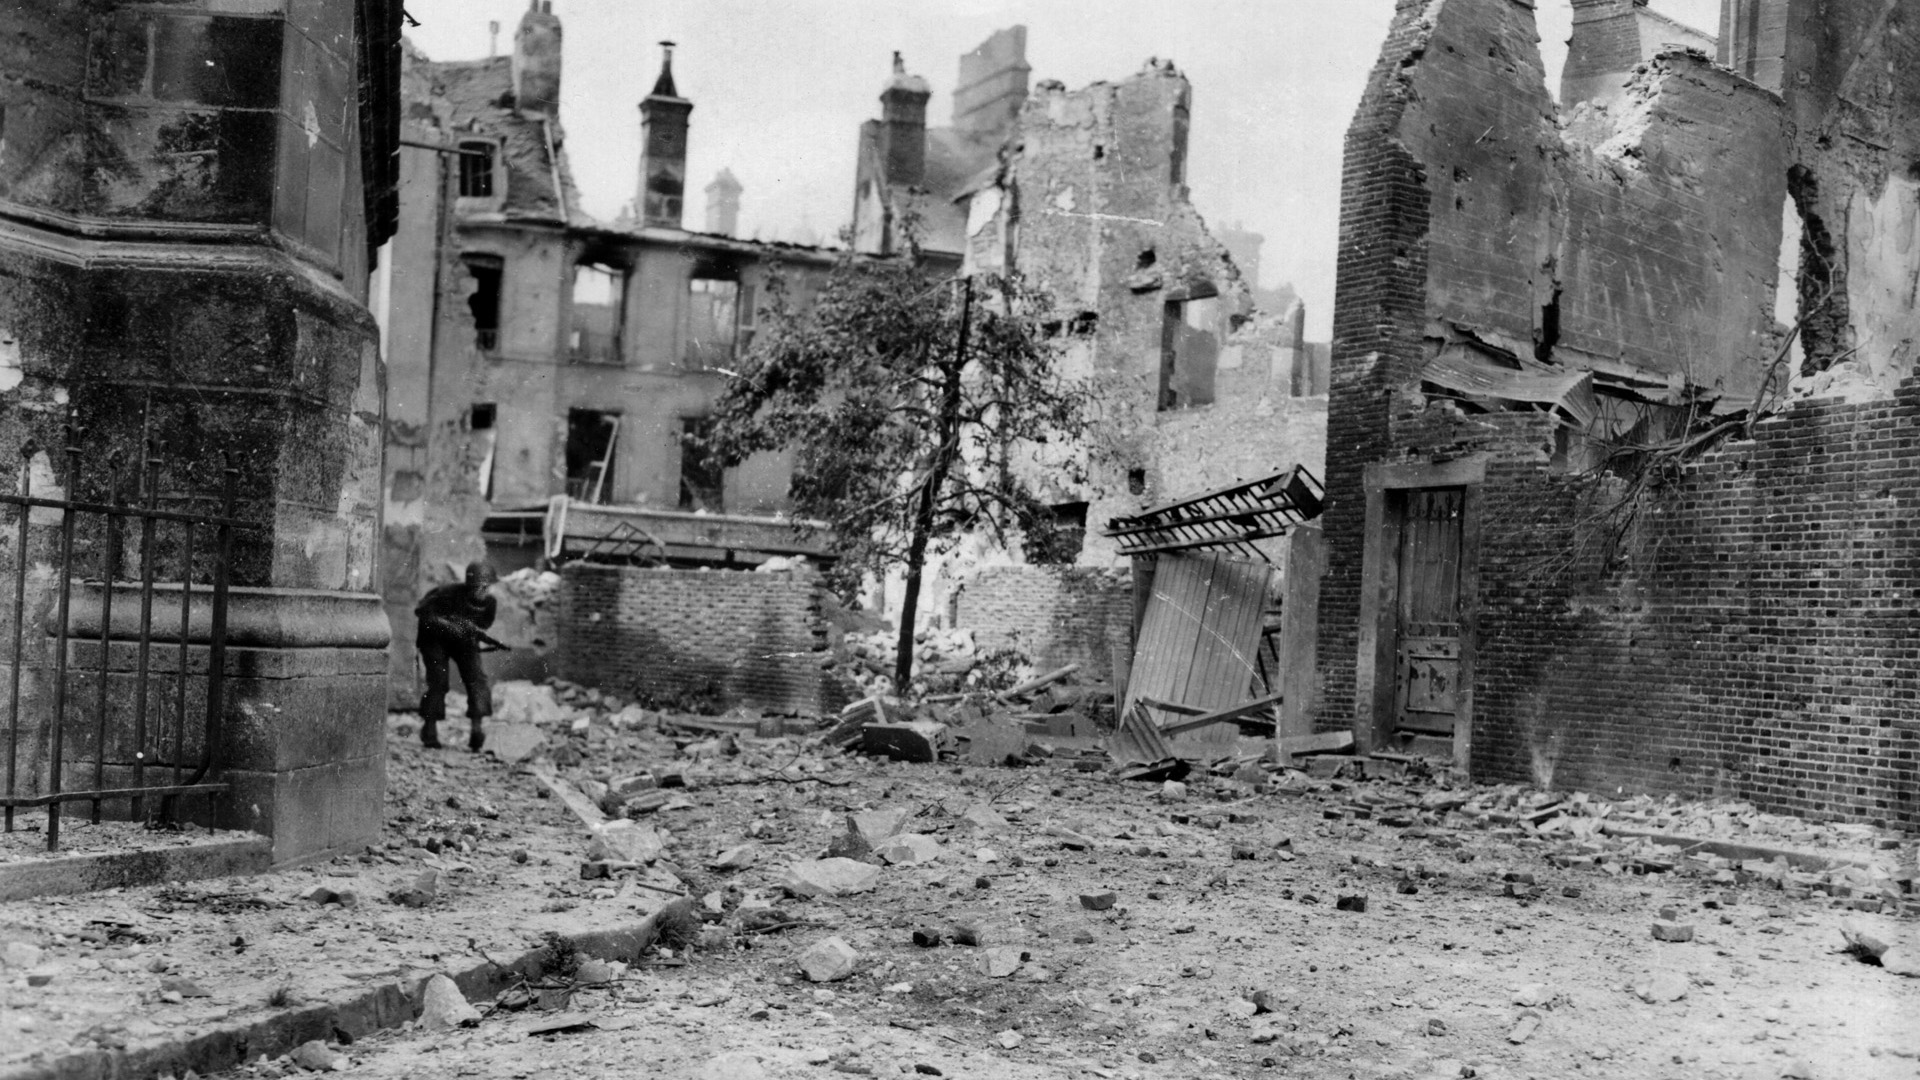 Armed with a Thompson submachine gun, an American soldier of the 80th Division proceeds warily through a rubble strewn street in Argentan searching for remaining Germans. 